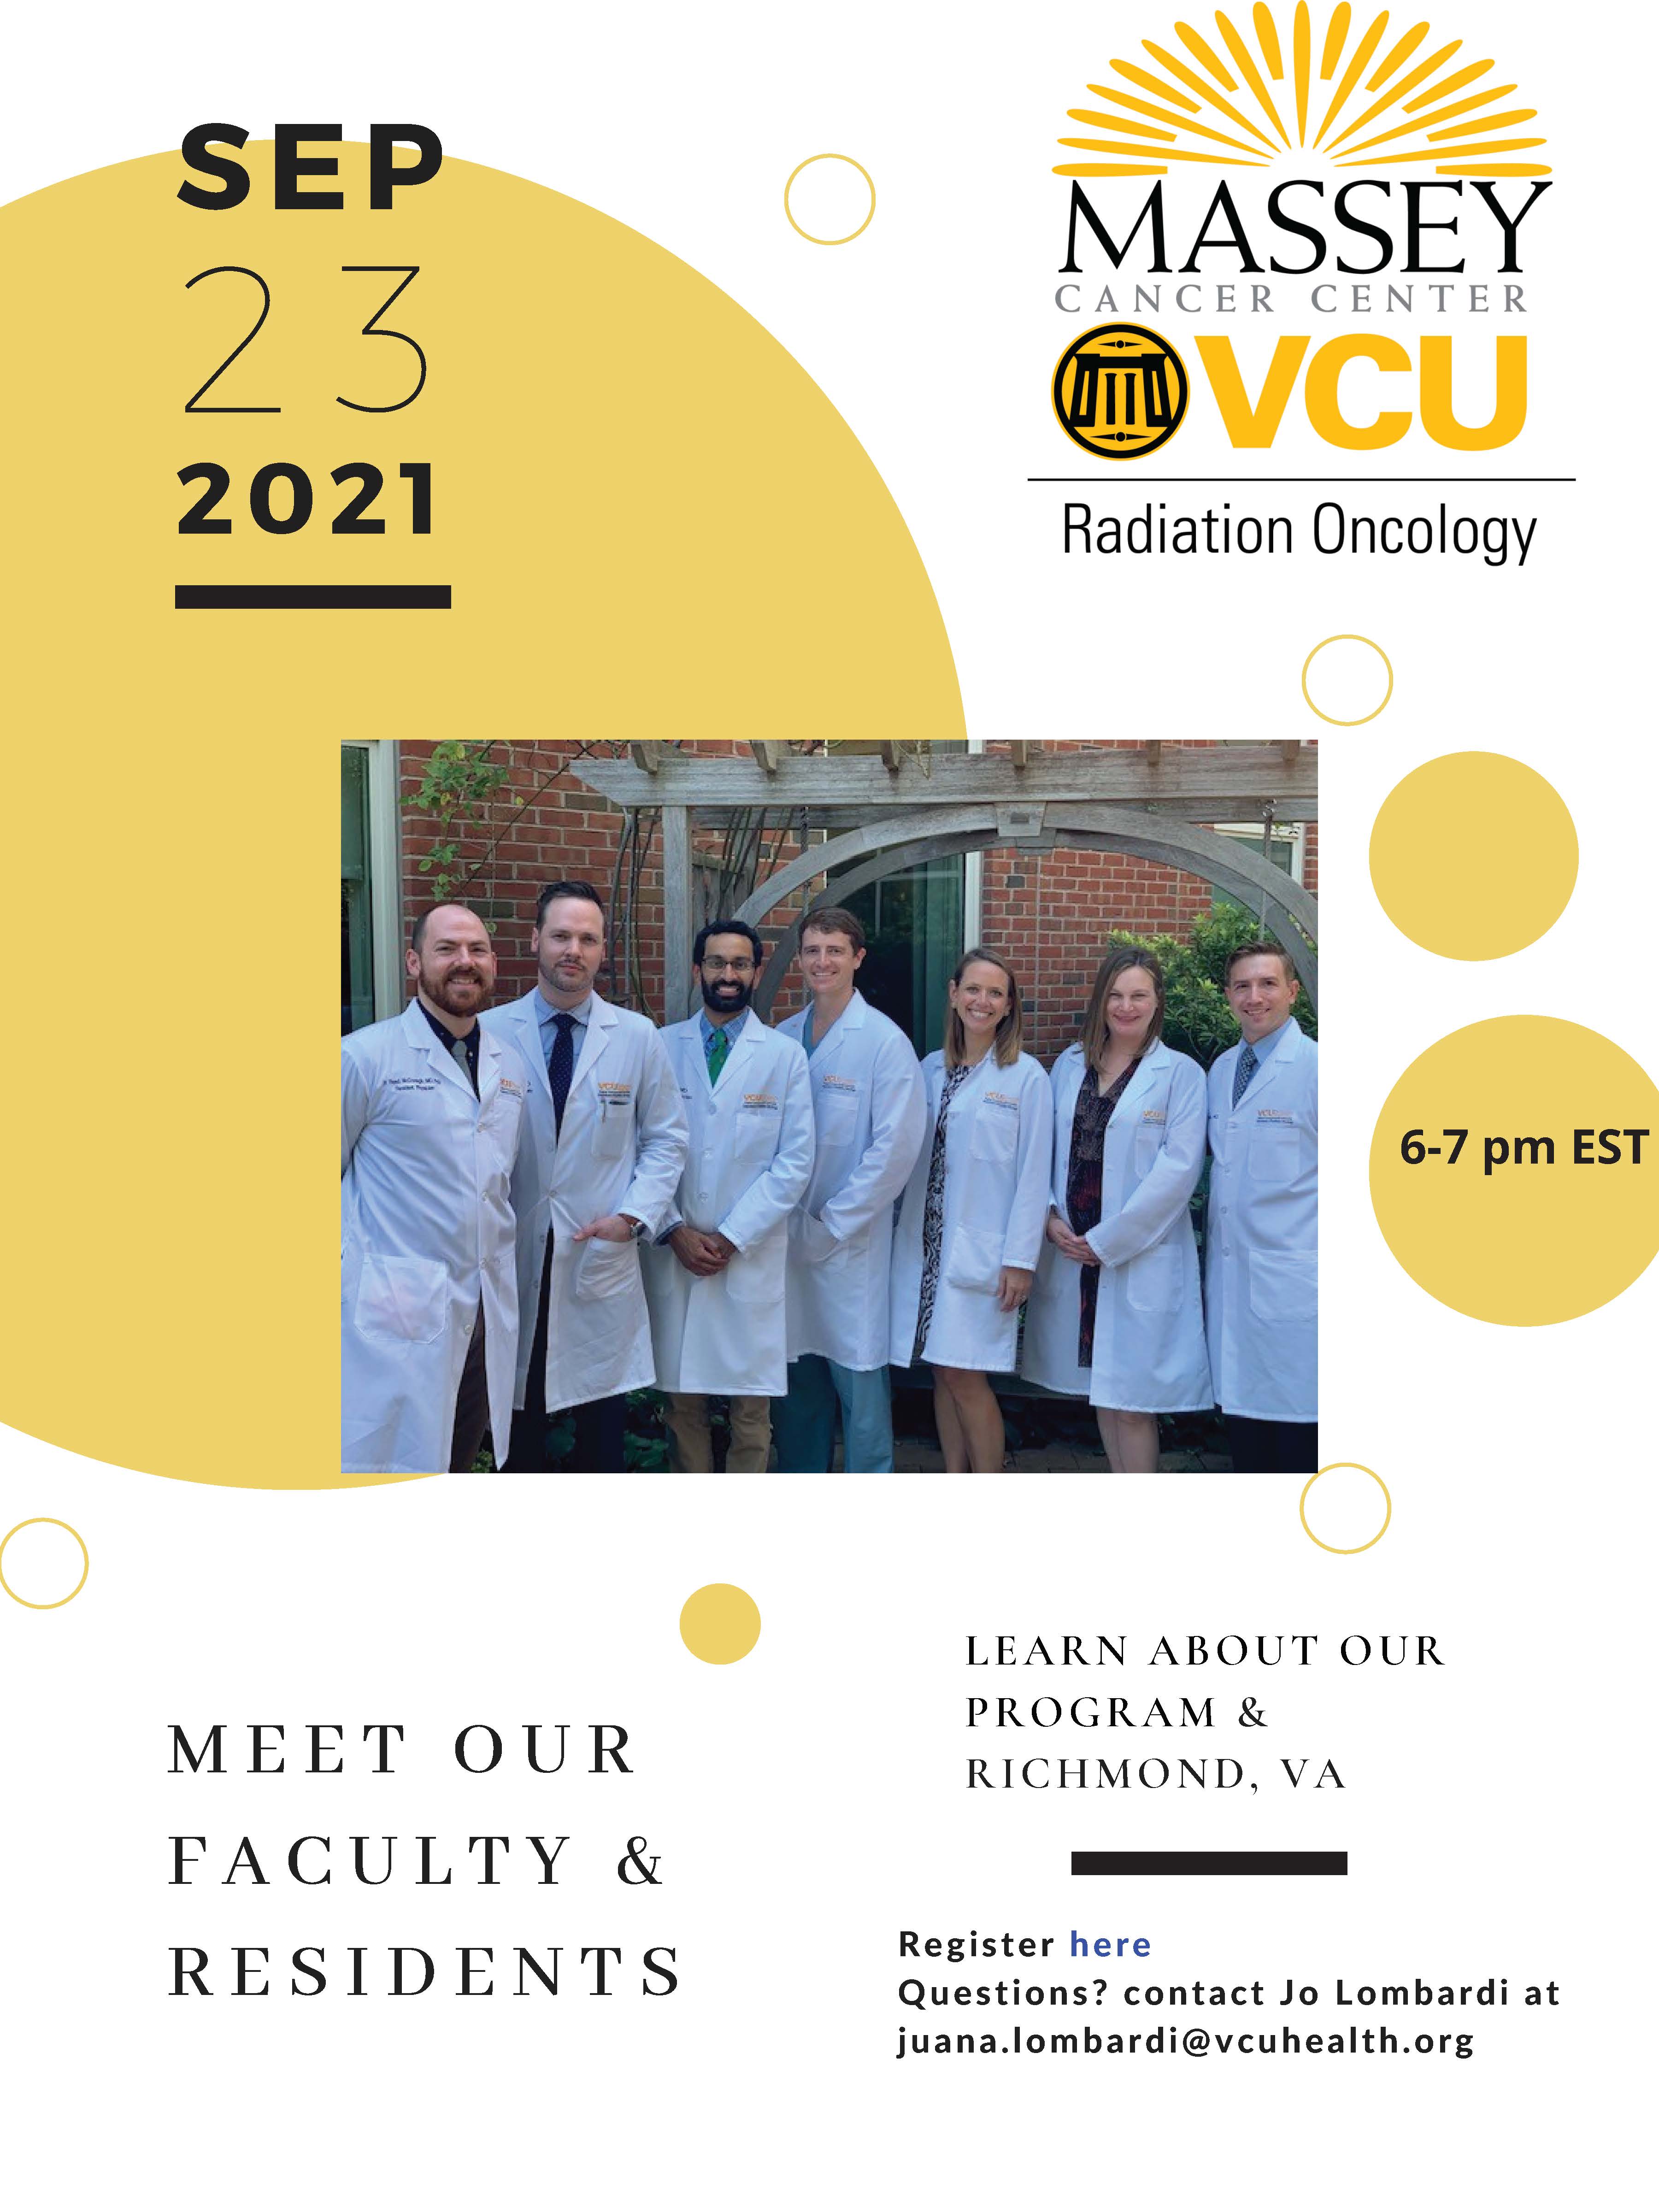 Meet our Faculty & Residents at the VCU Radiation Oncology Open House!